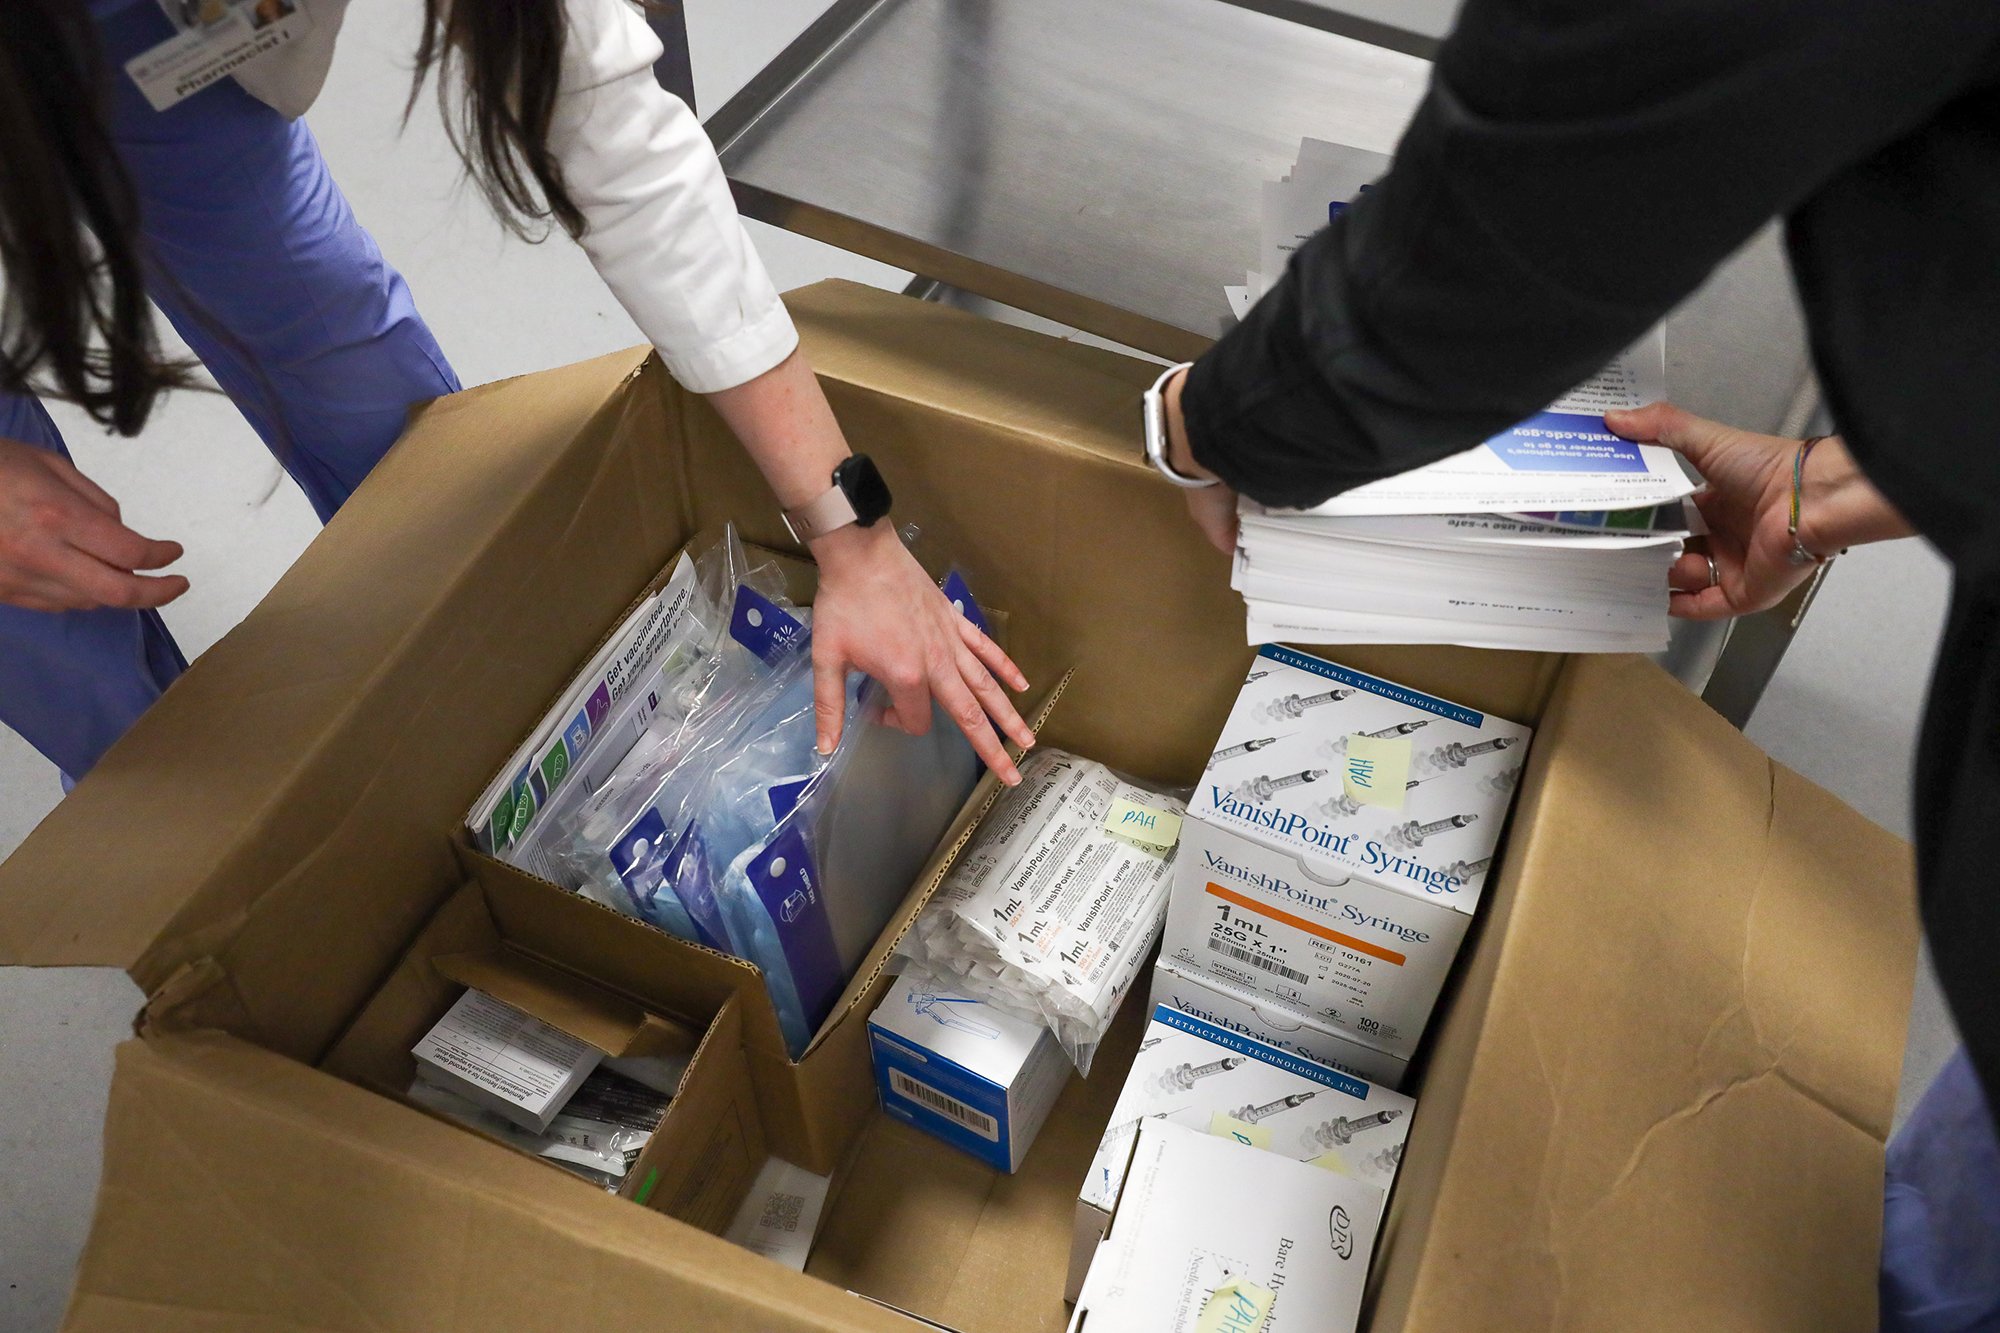 Medical workers open a large cardboard box filled with COVID vaccines, syringes and other medical supplies.